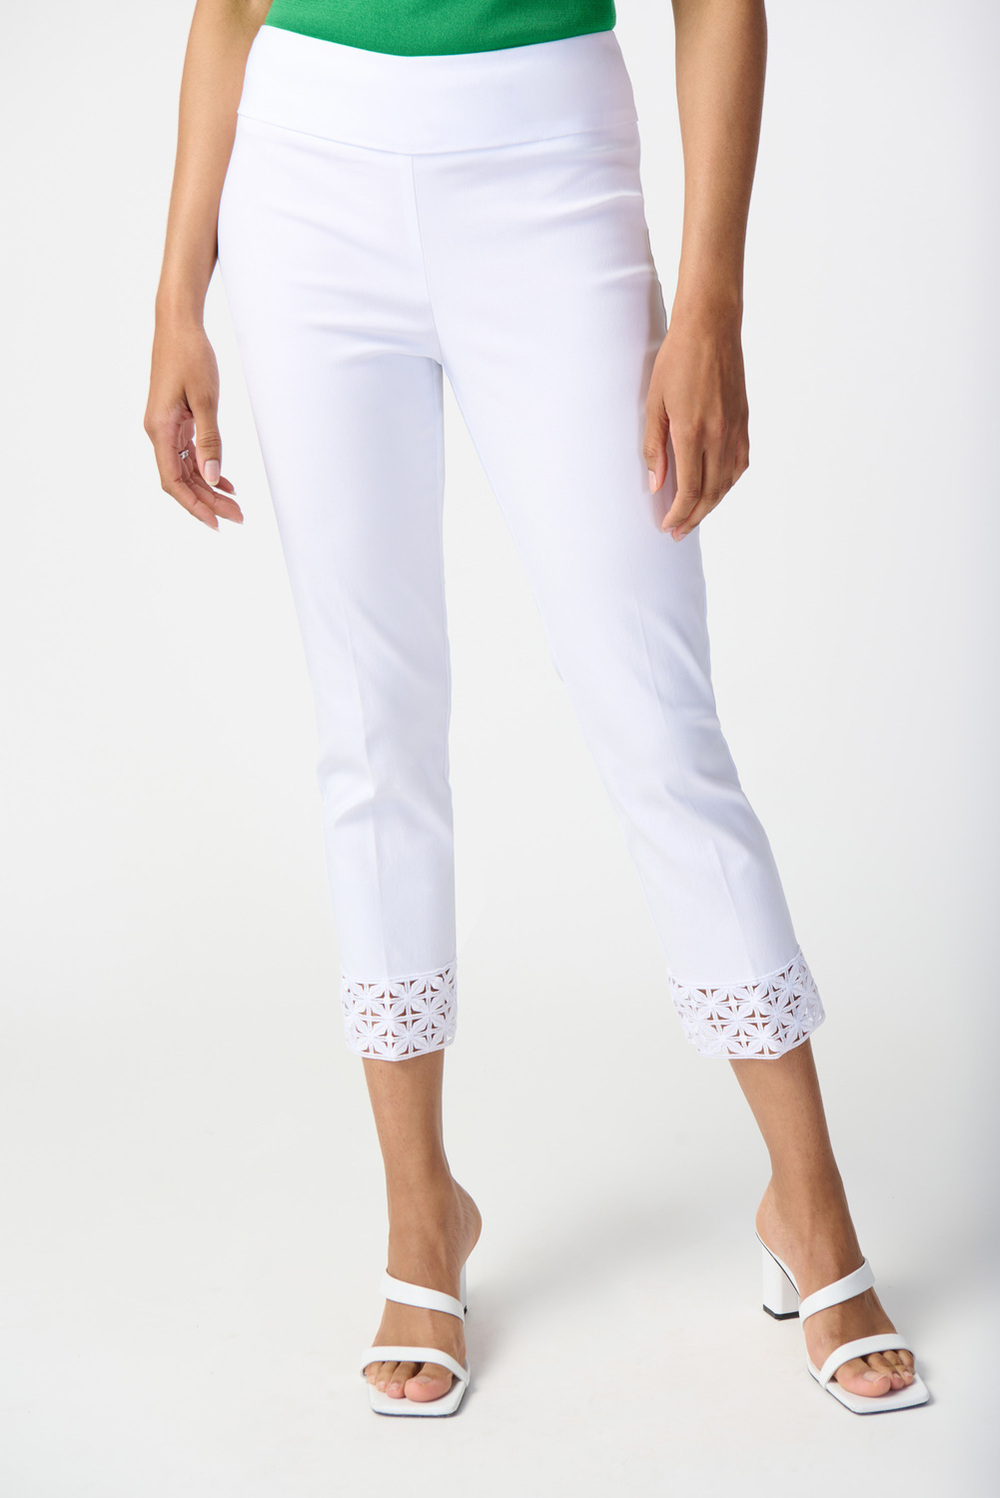 Stretch Detail Lace Pant Style 241102. White